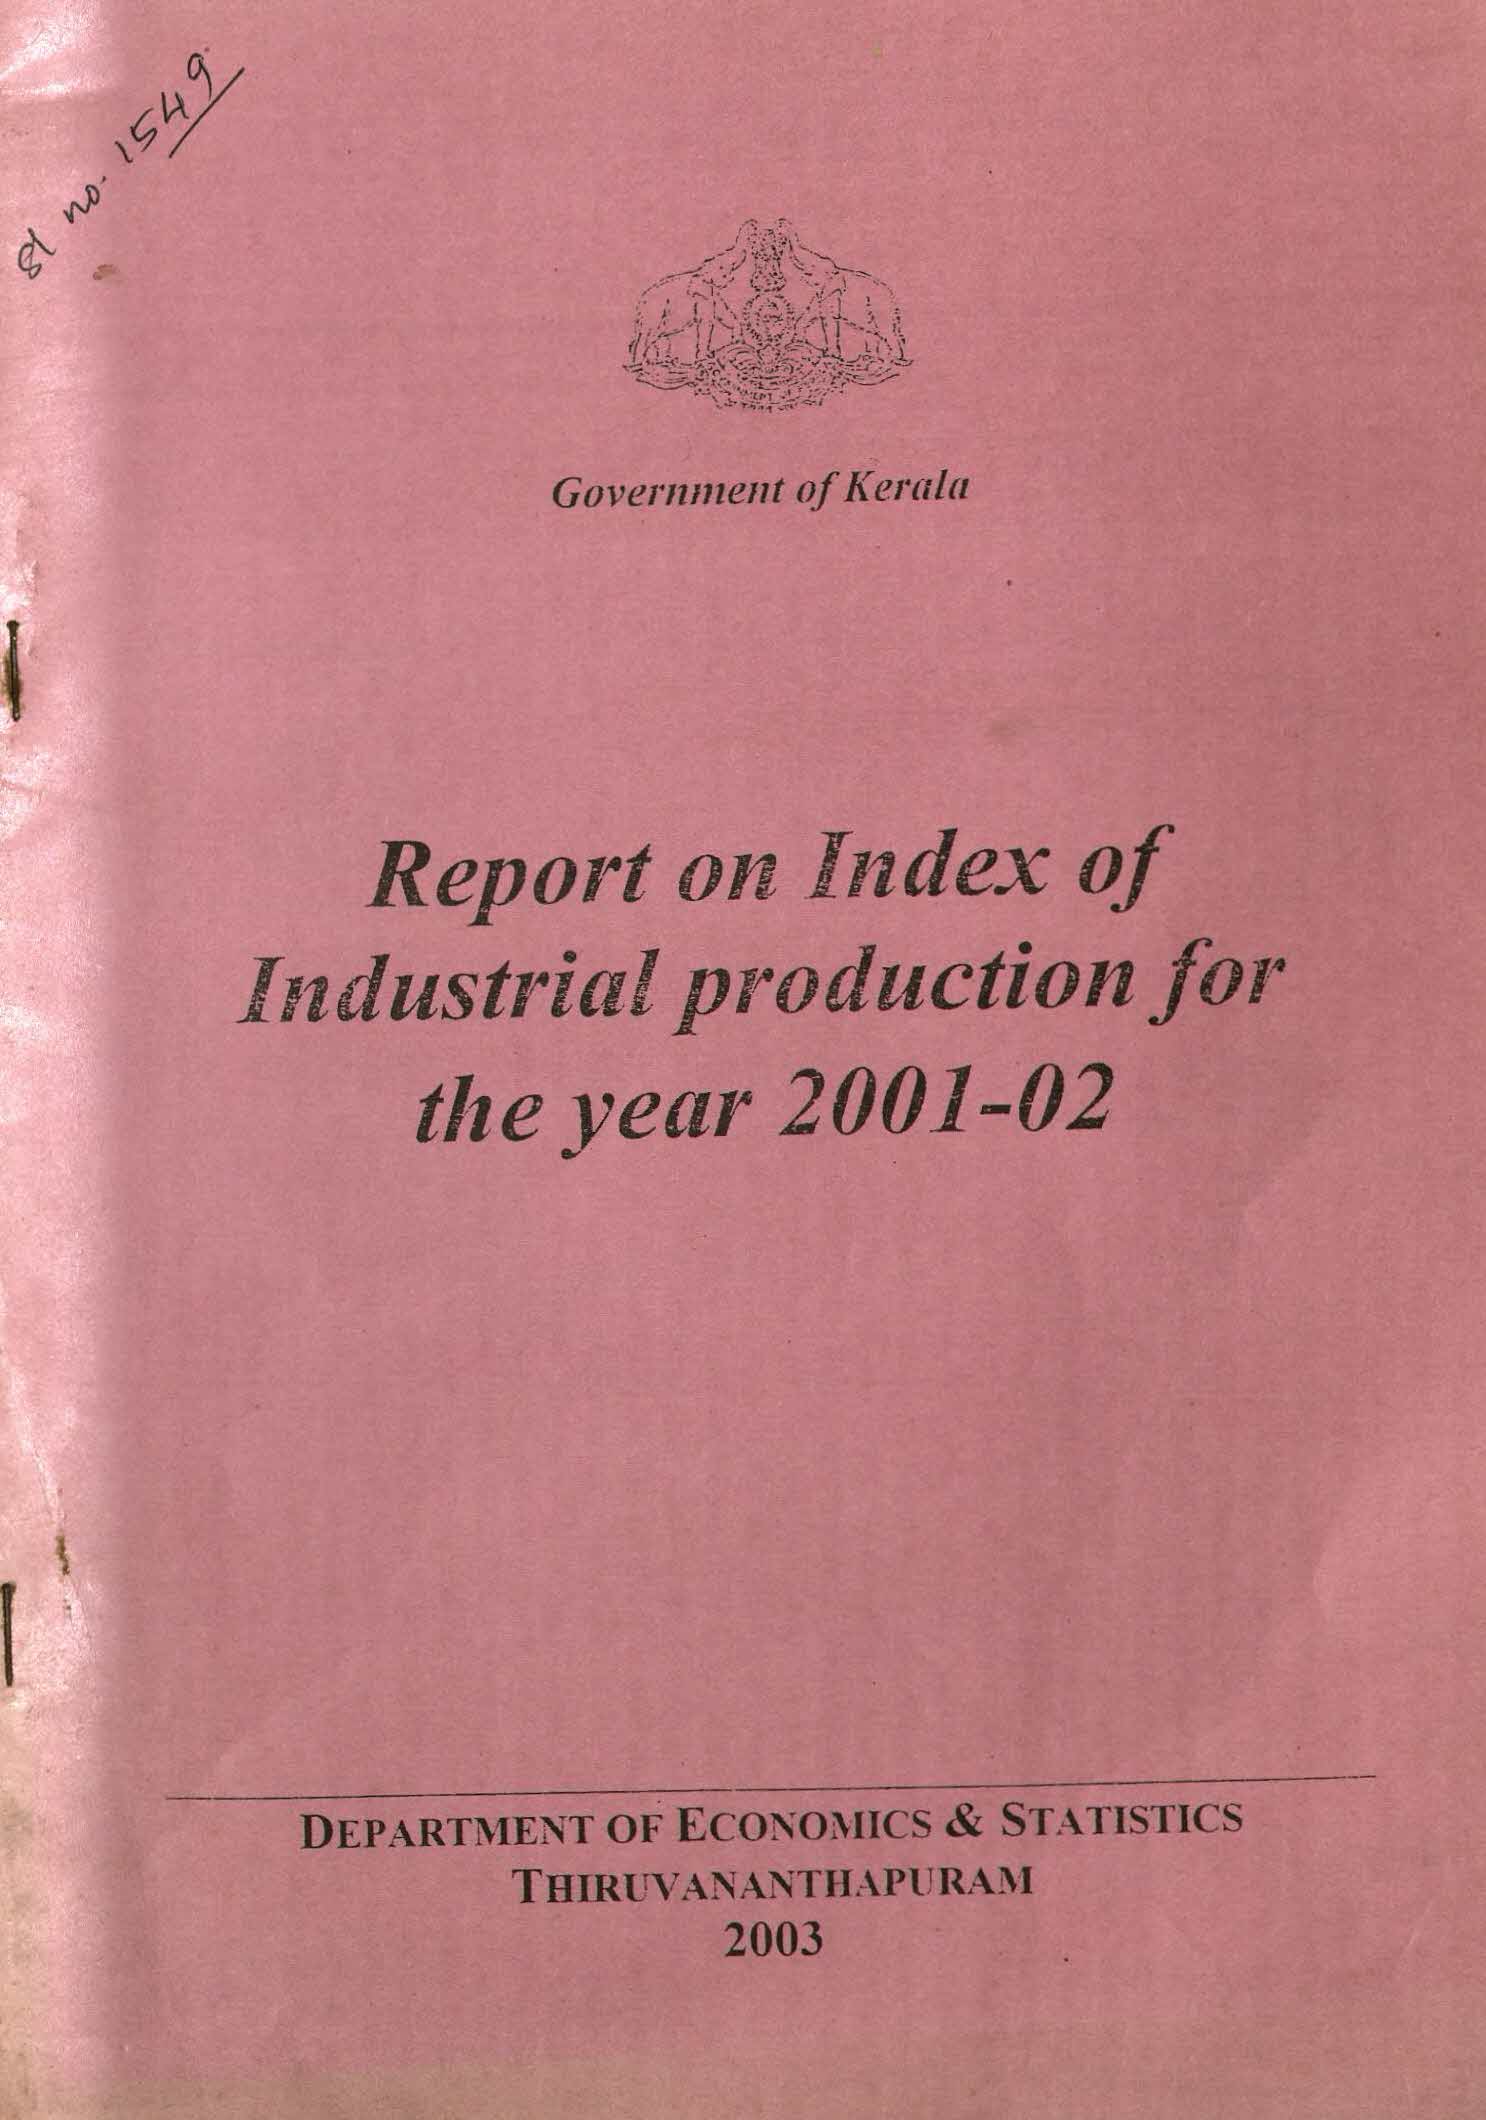 Report on Index of Industrial Production 2001-02